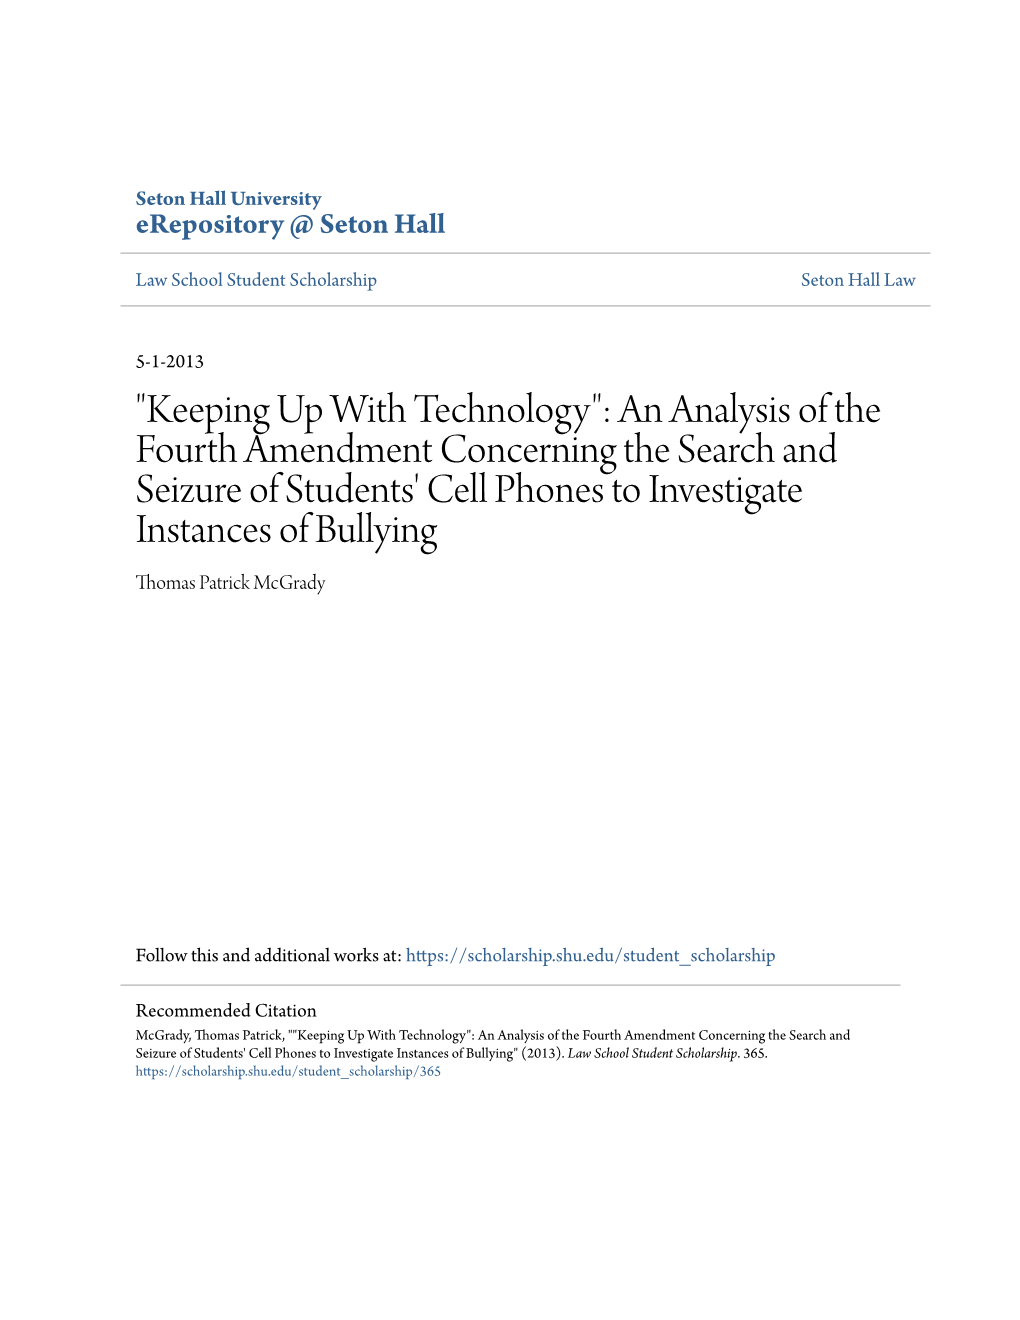 "Keeping up with Technology": an Analysis of the Fourth Amendment